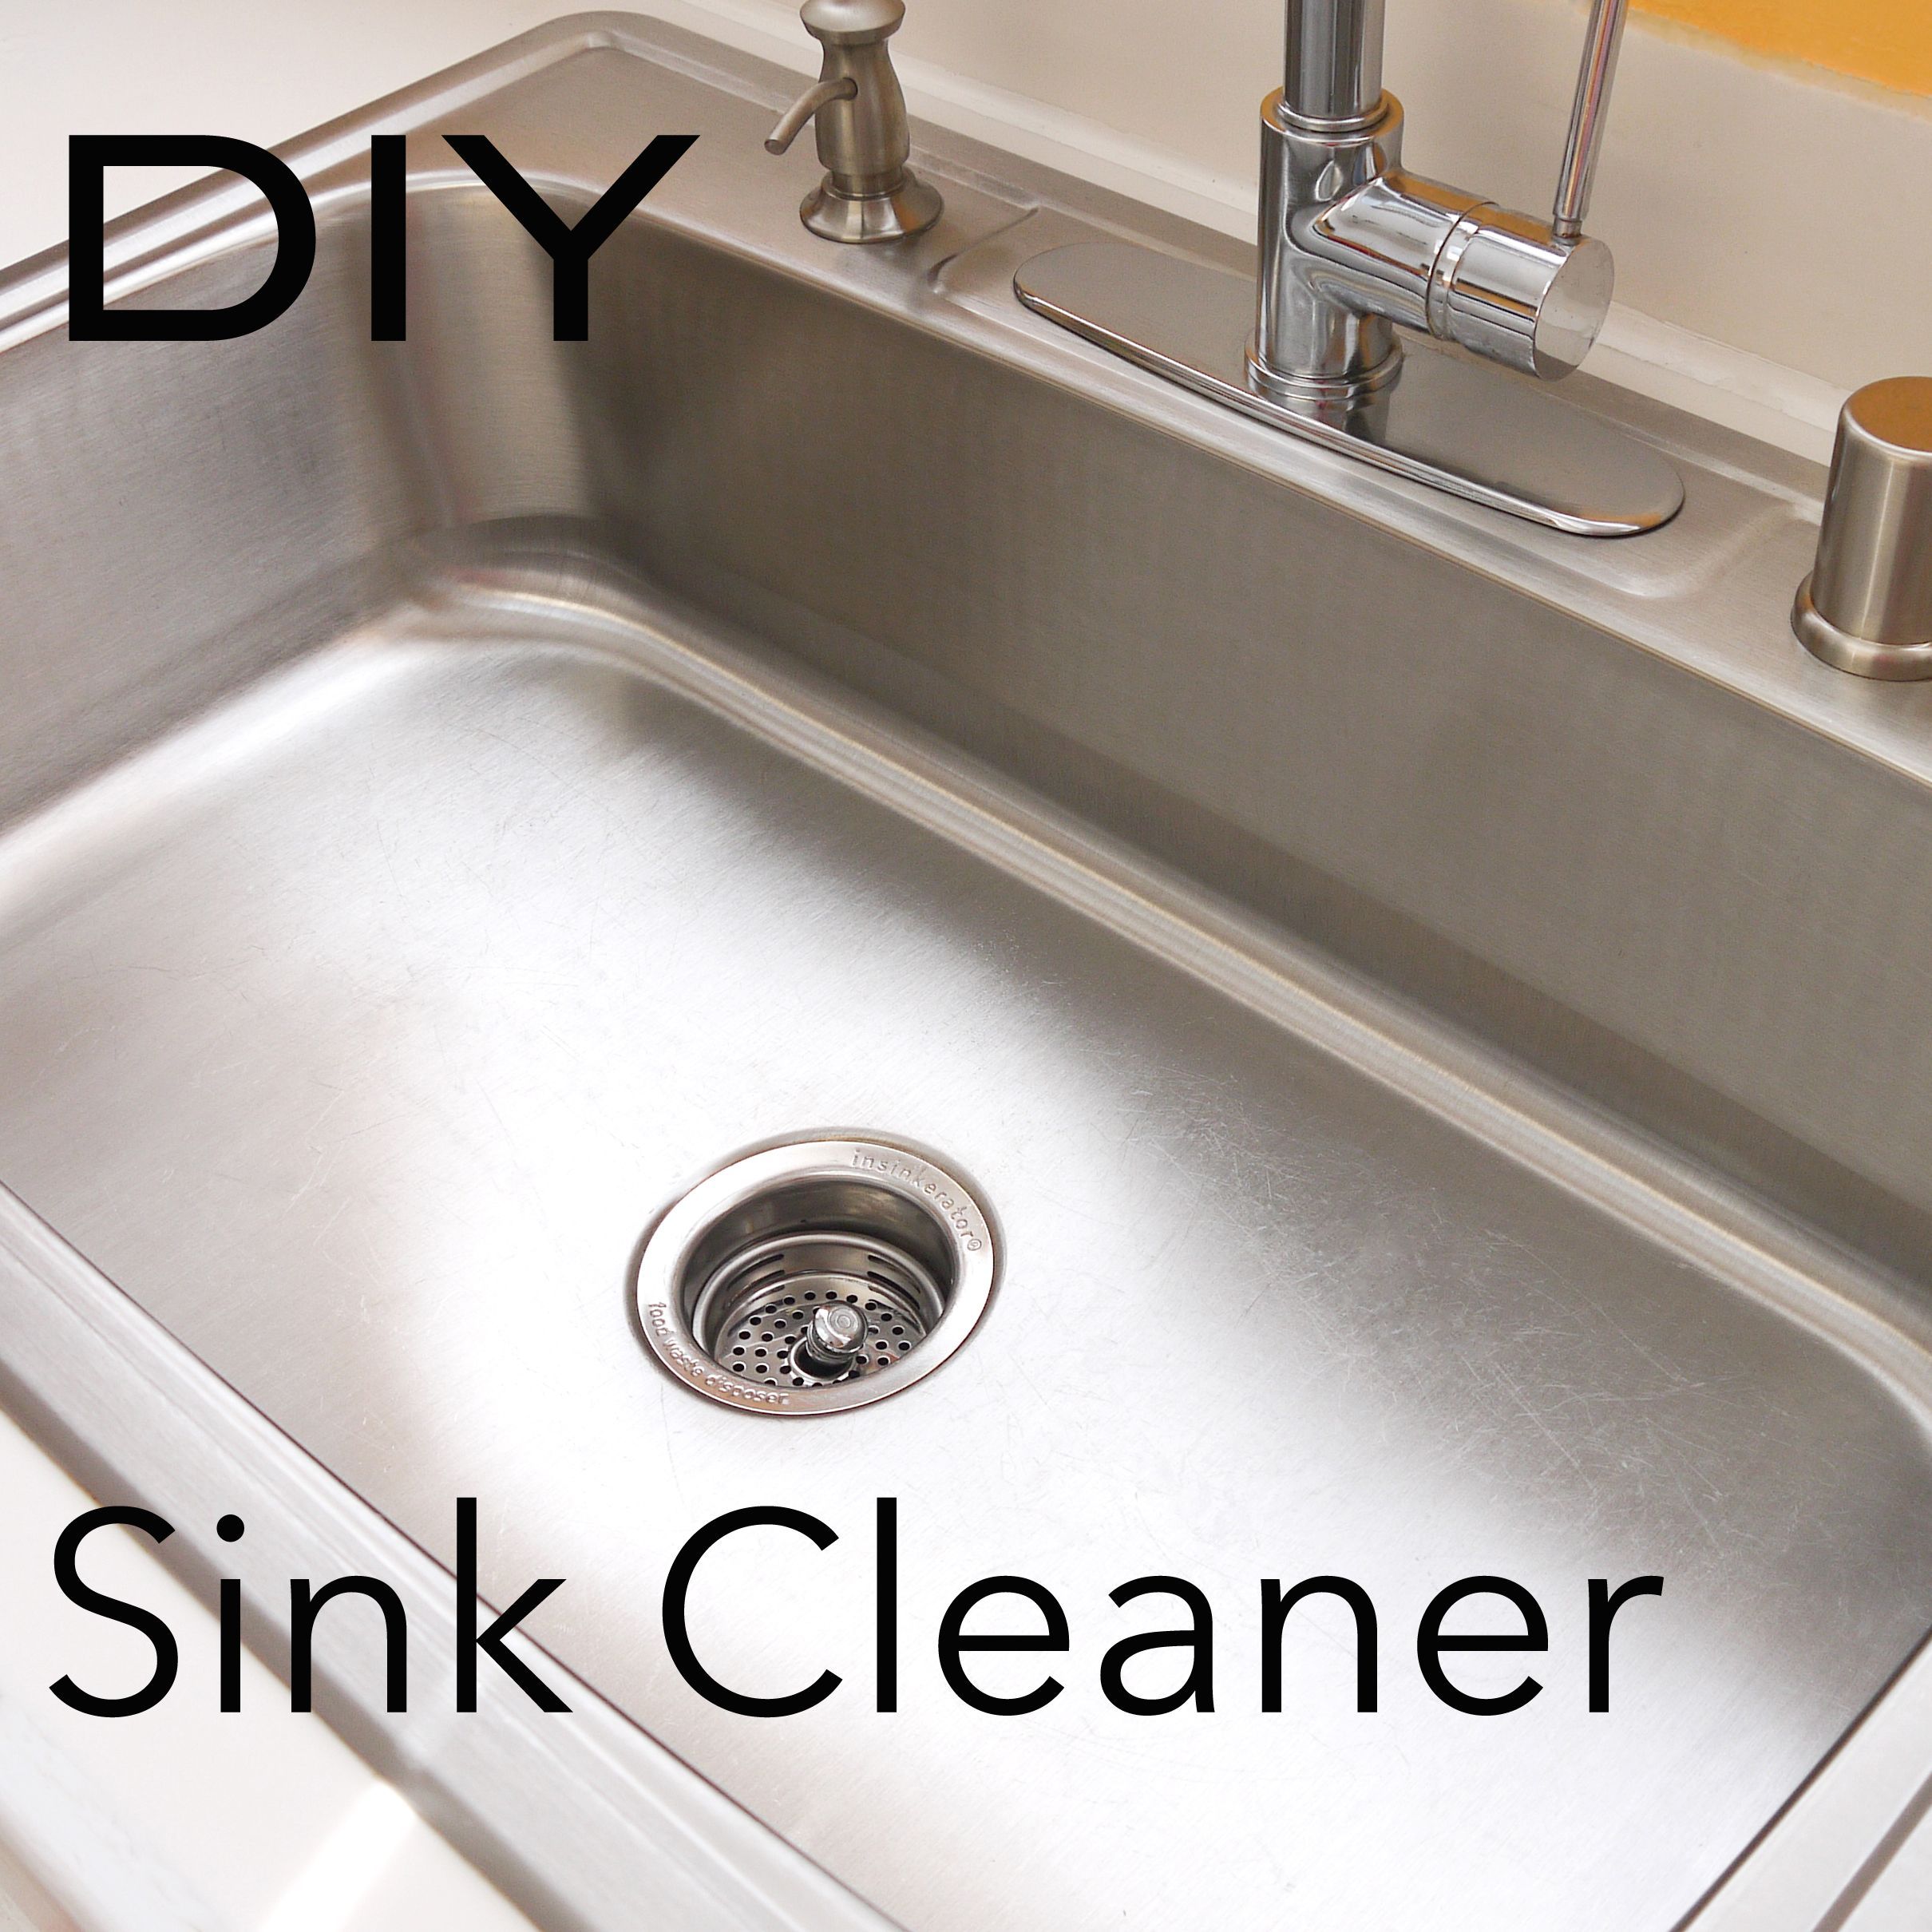 How to clean your kitchen sink and make it shine!  Start by scrubbing the sink w